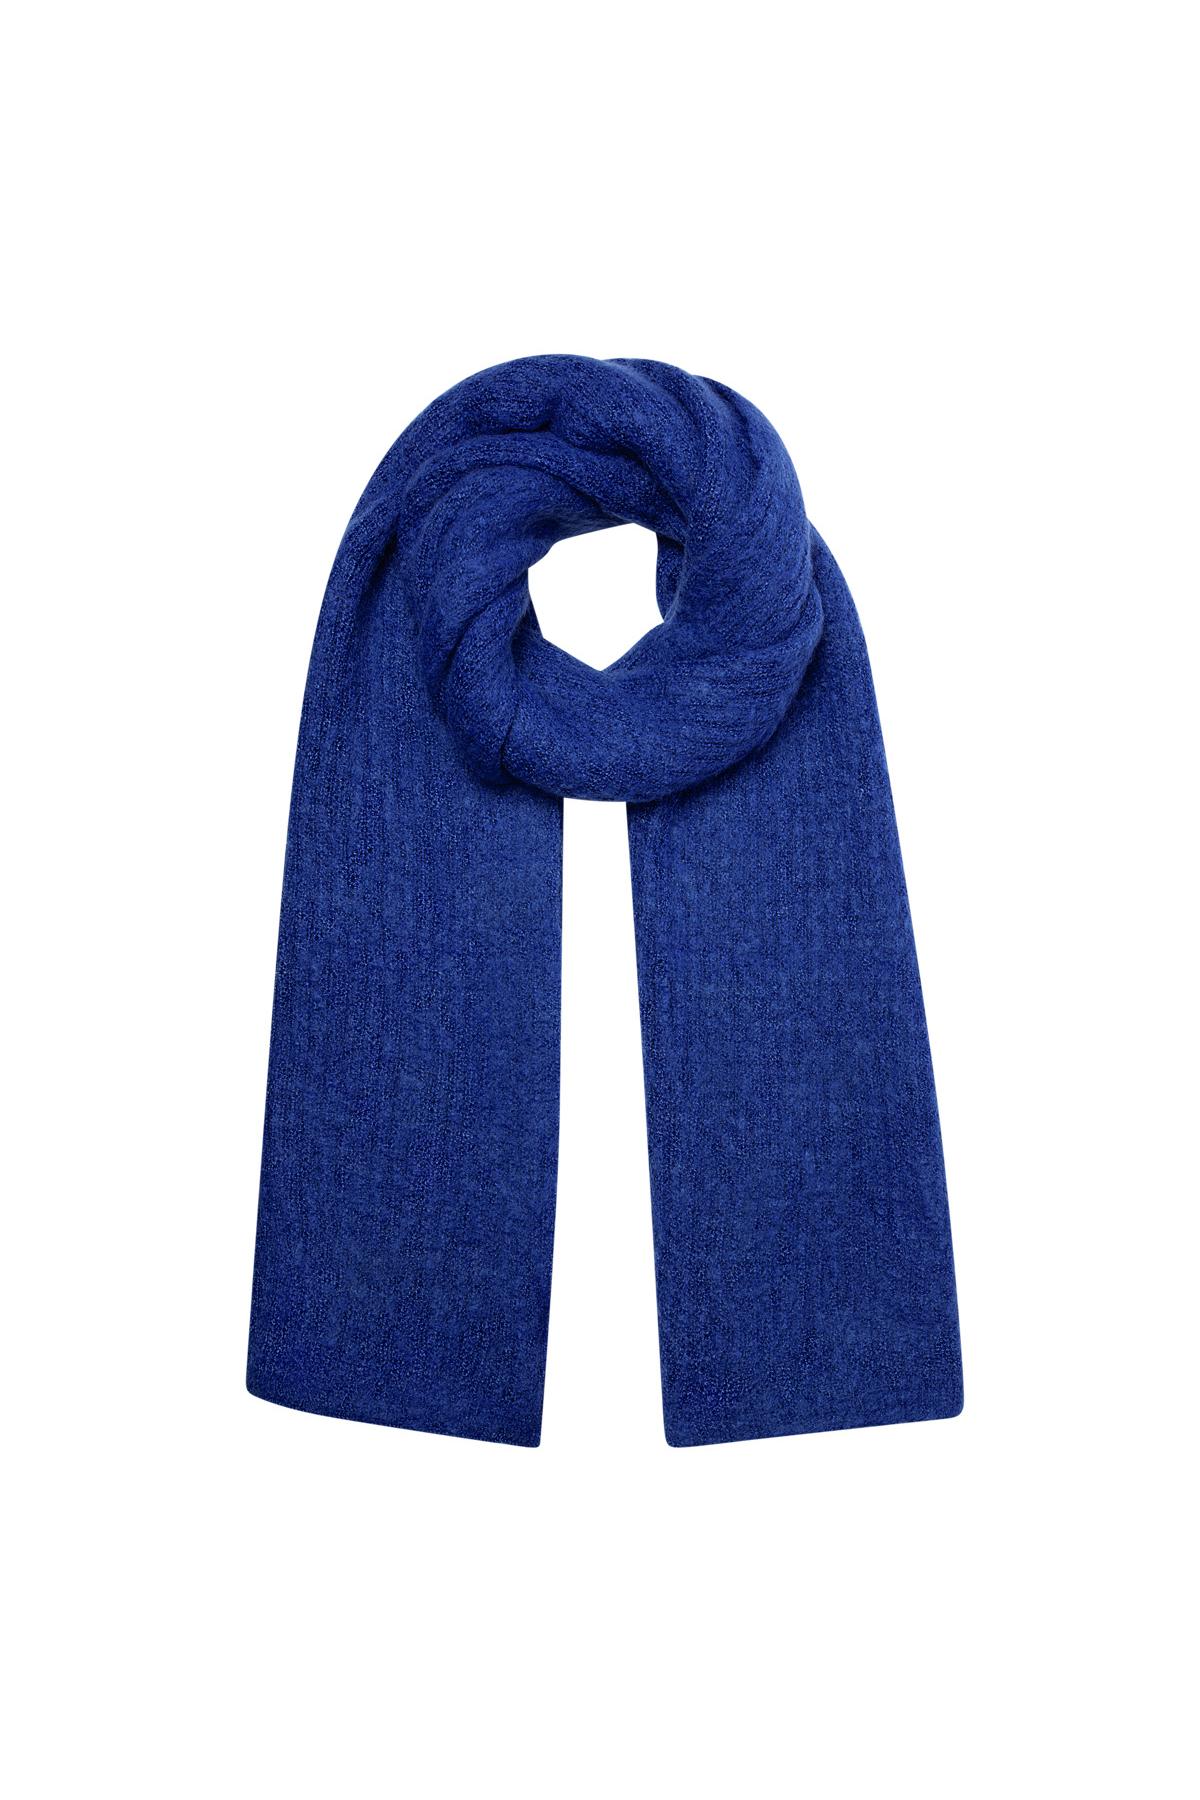 Scarf knitted plain - blue 